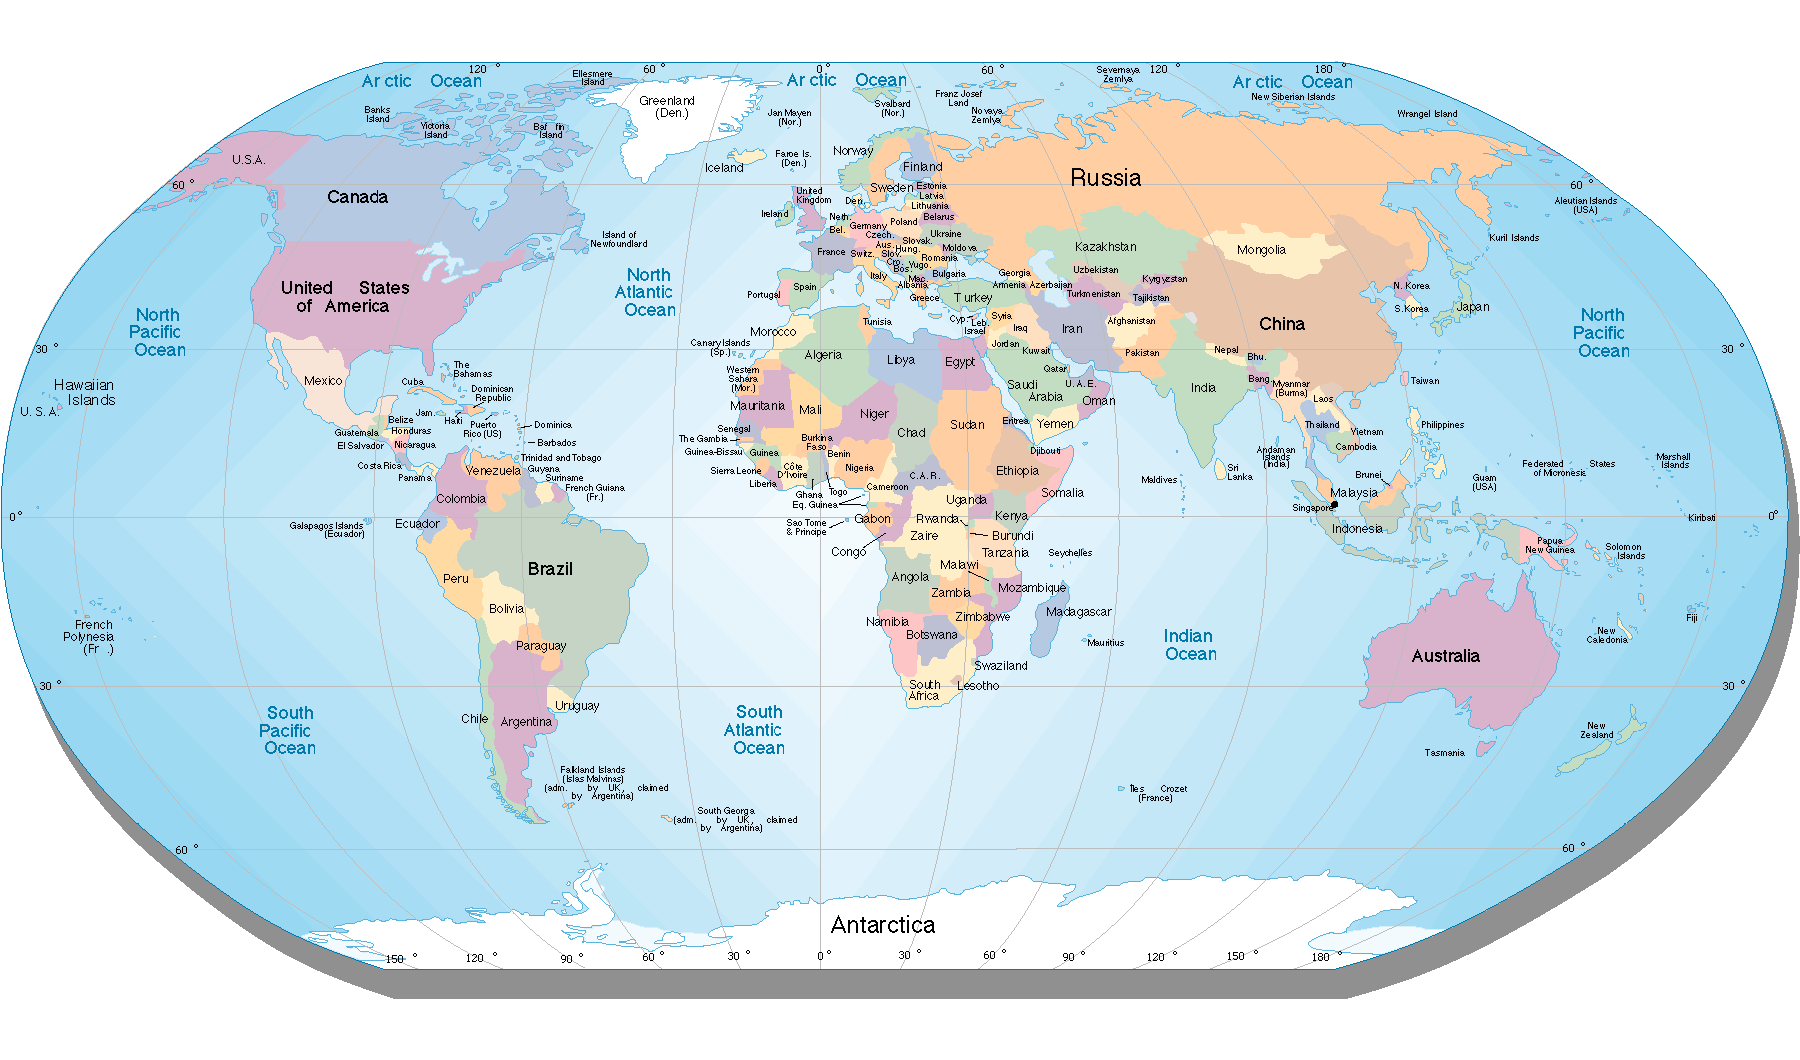 Printable World Map With Countries And Cities